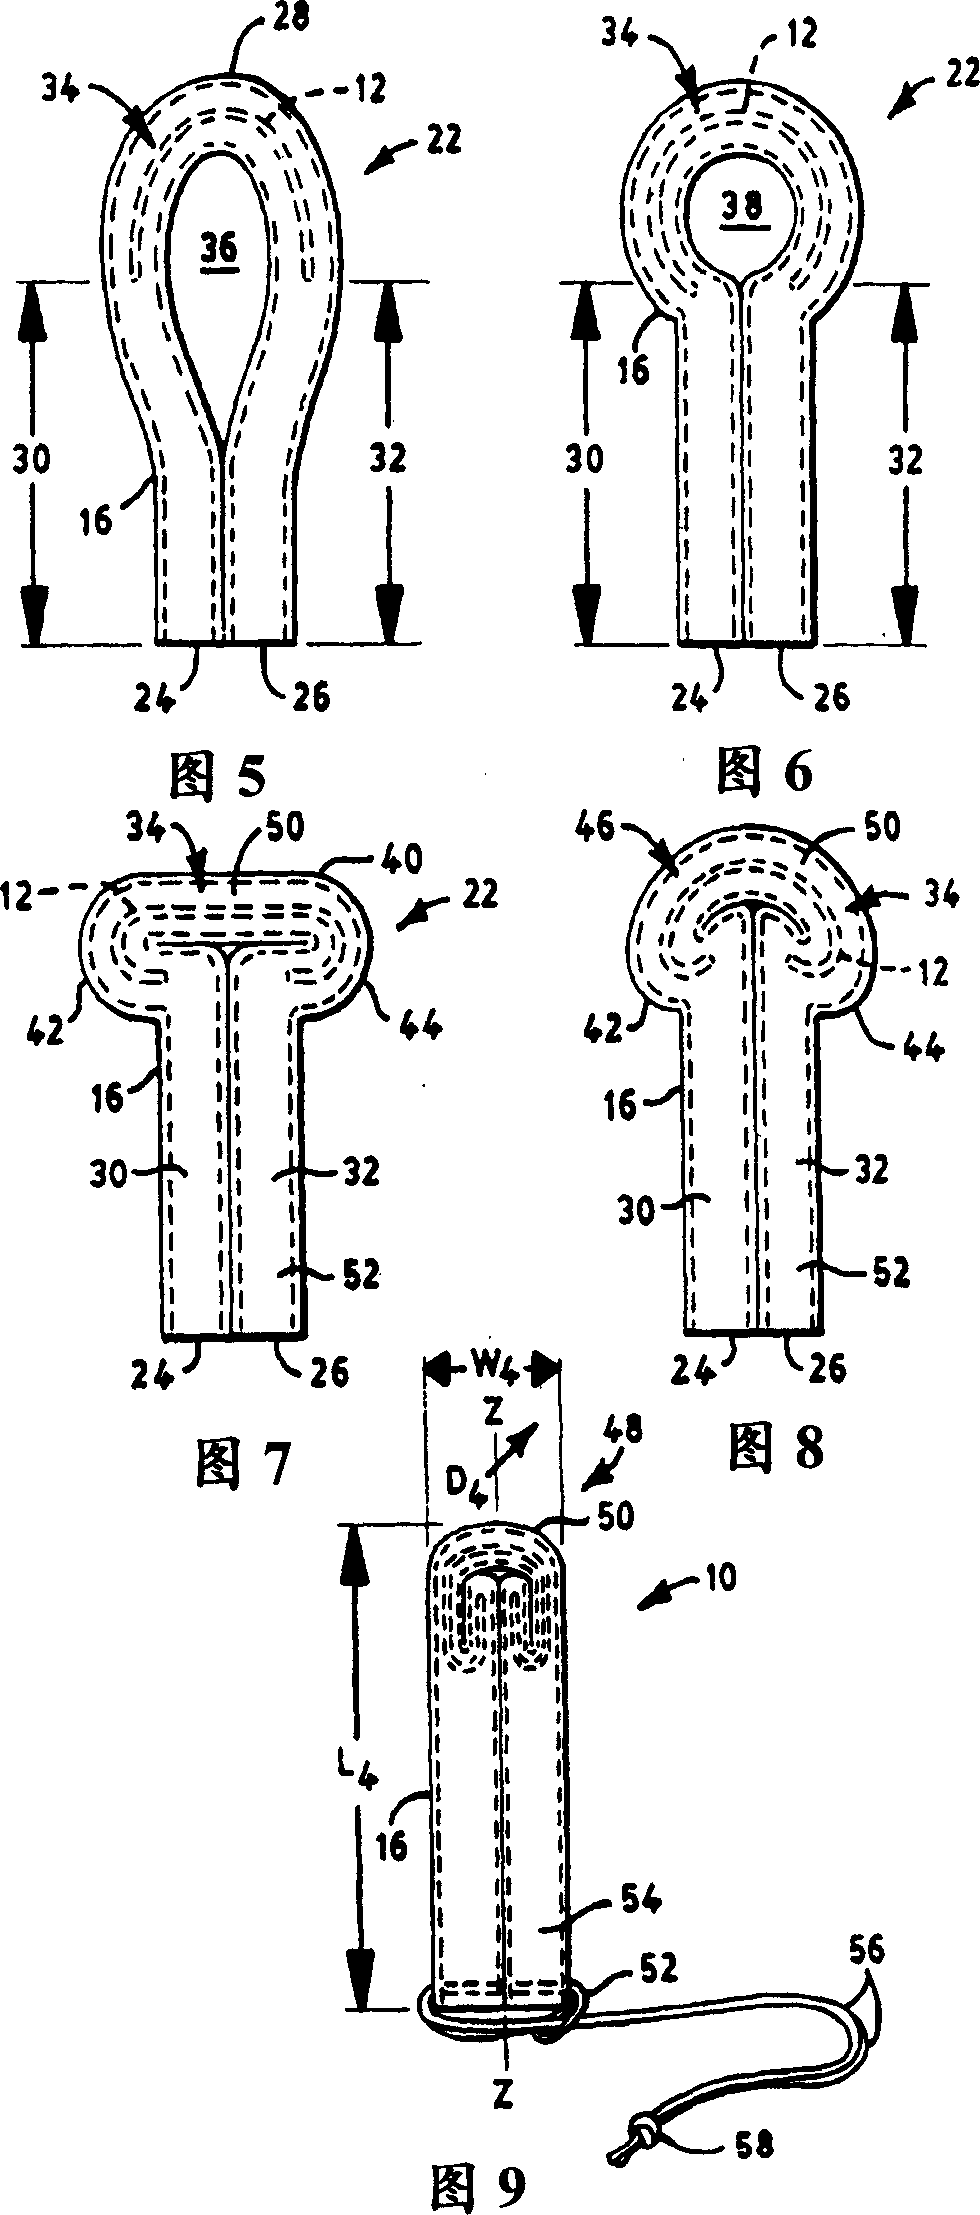 Expandable dome-shaped urinary incontinence device and method of making the same